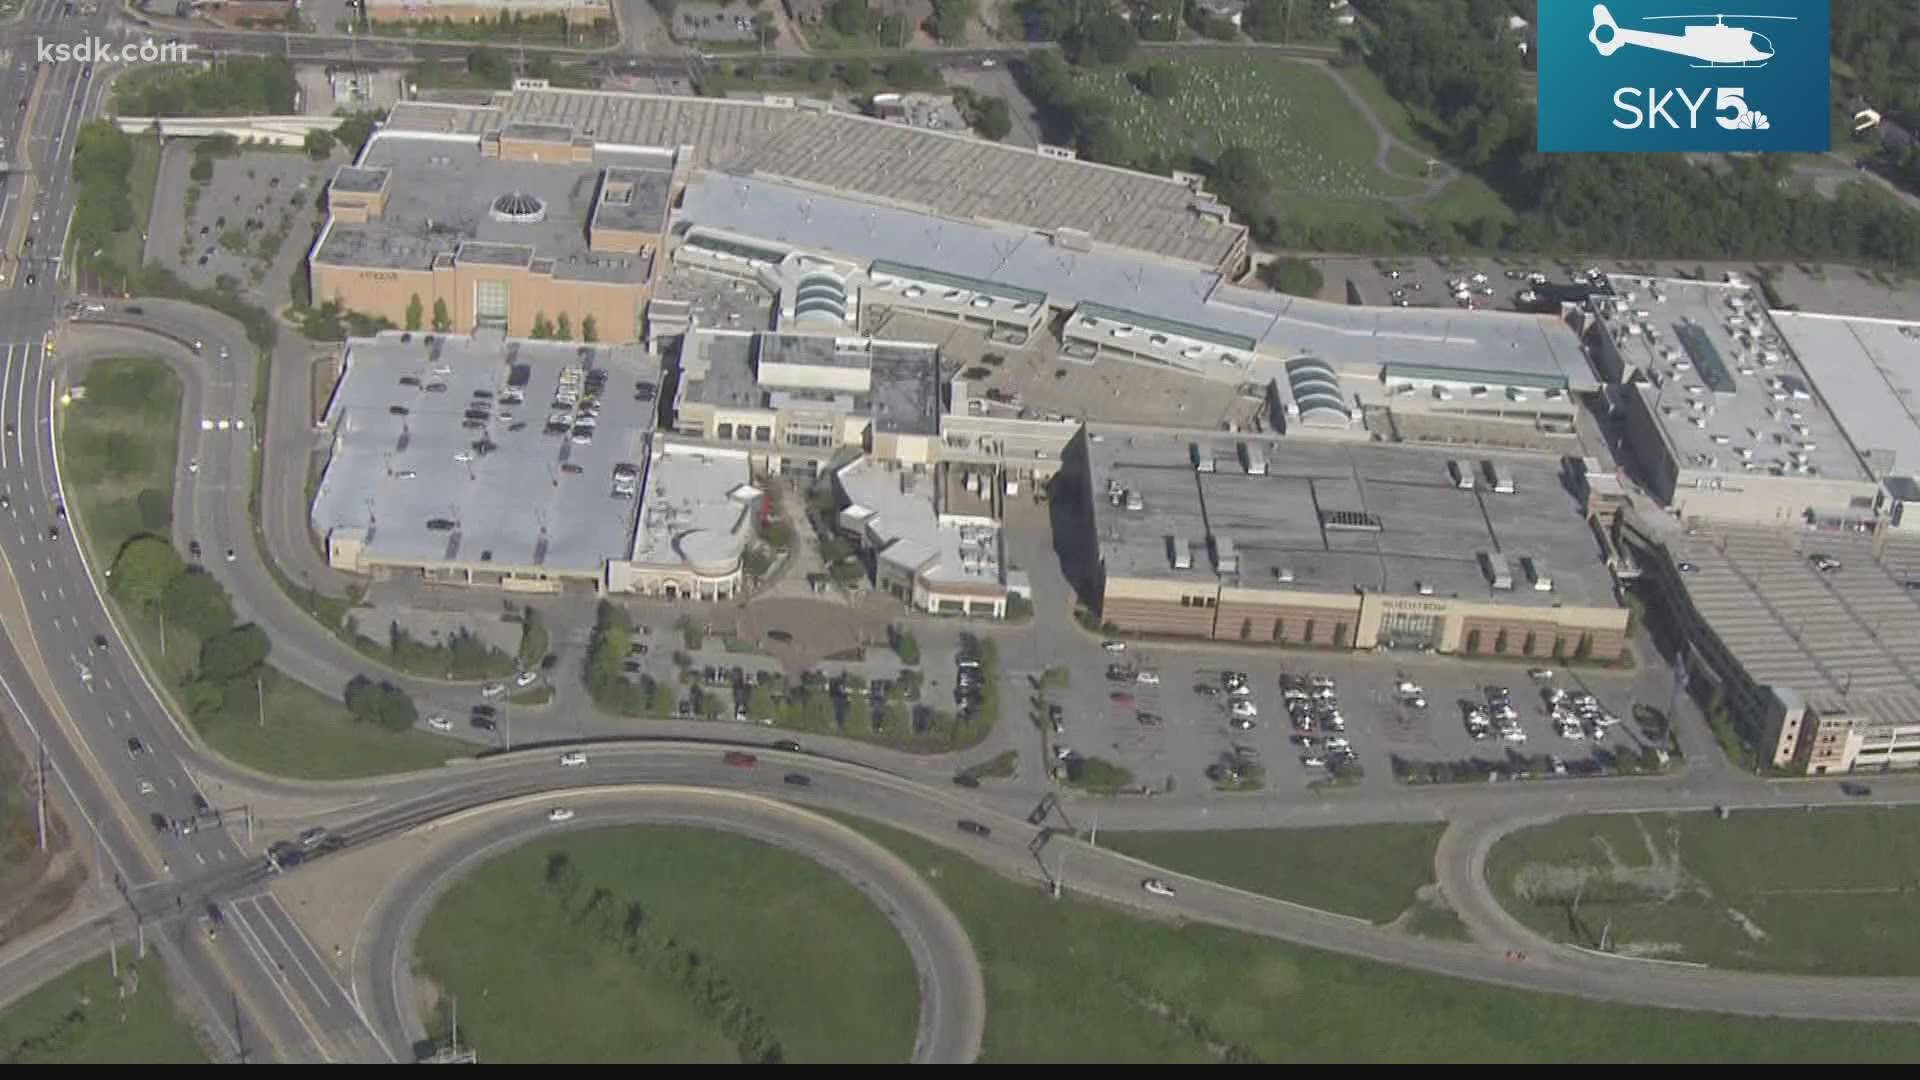 The company owns West County Center, St. Clair Square, Mid Rivers Mall and South County Center